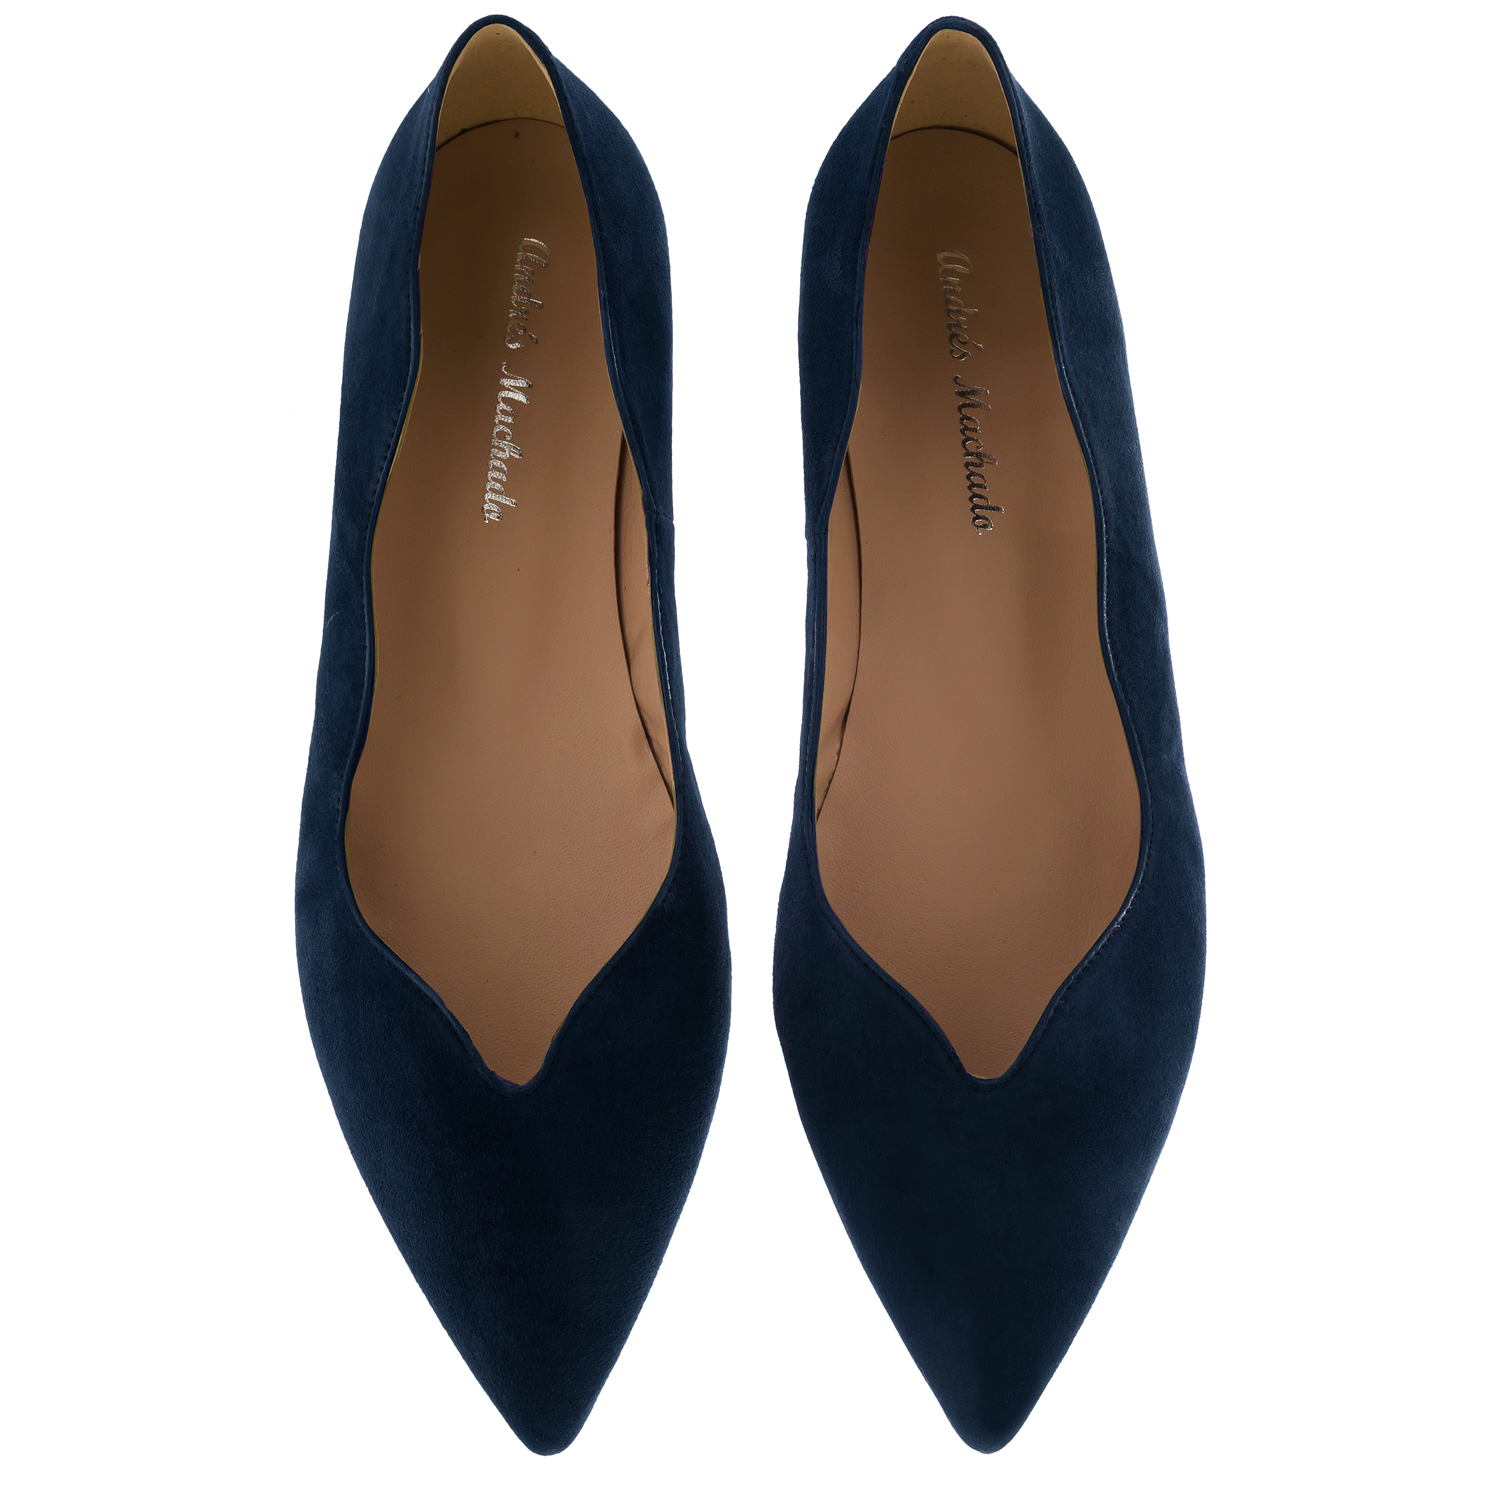 Waved Upper Ballet Flats in Navy Nappa Leather 